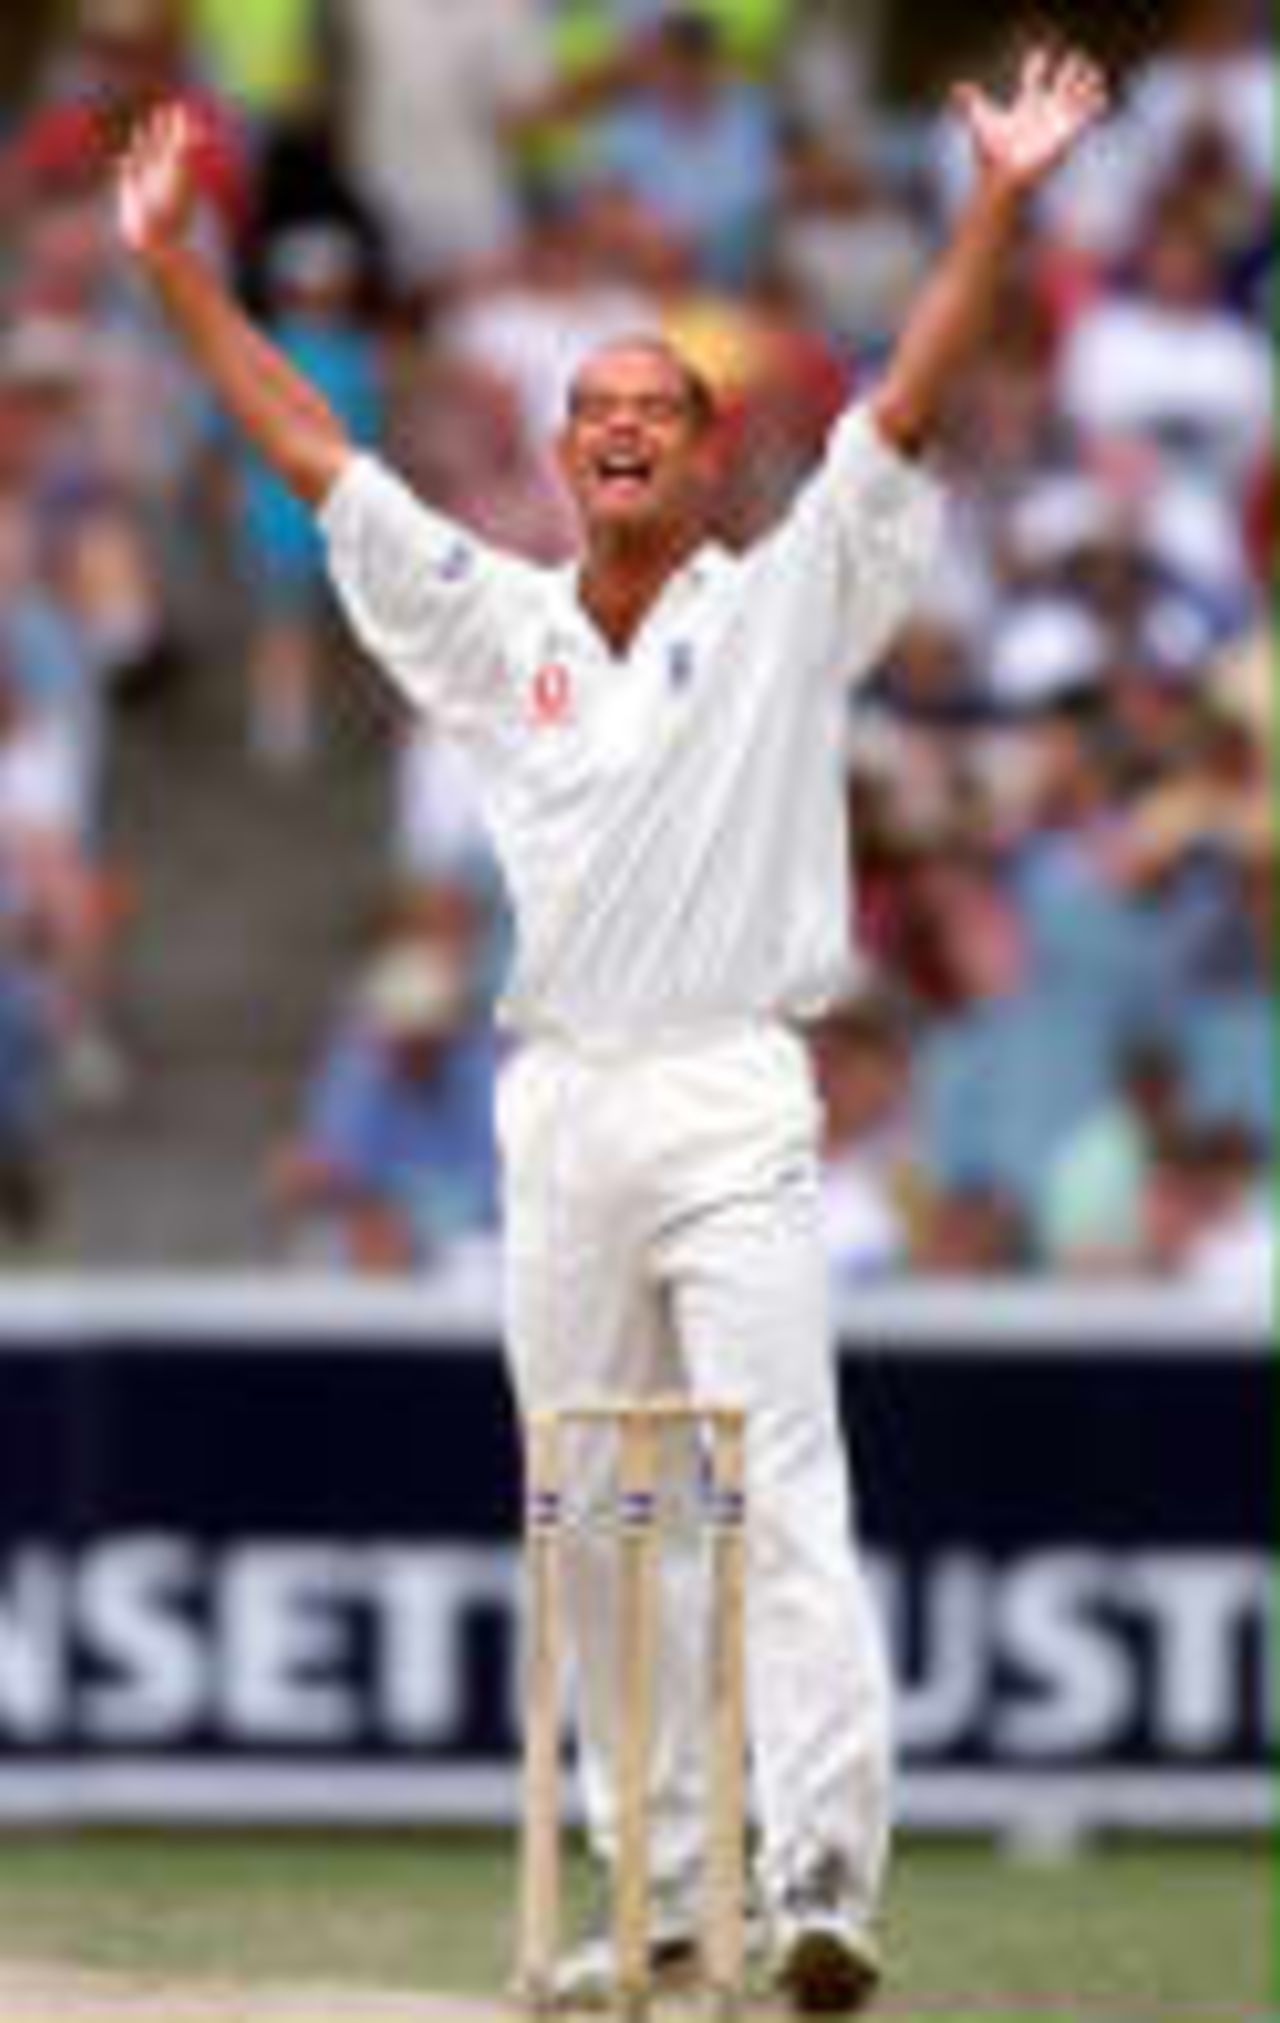 Dean Headley celebrates capturing another Australian wicket  - The Ashes, 1998/99, 4th Test Australia v England Melbourne Cricket Ground 29 December 1998